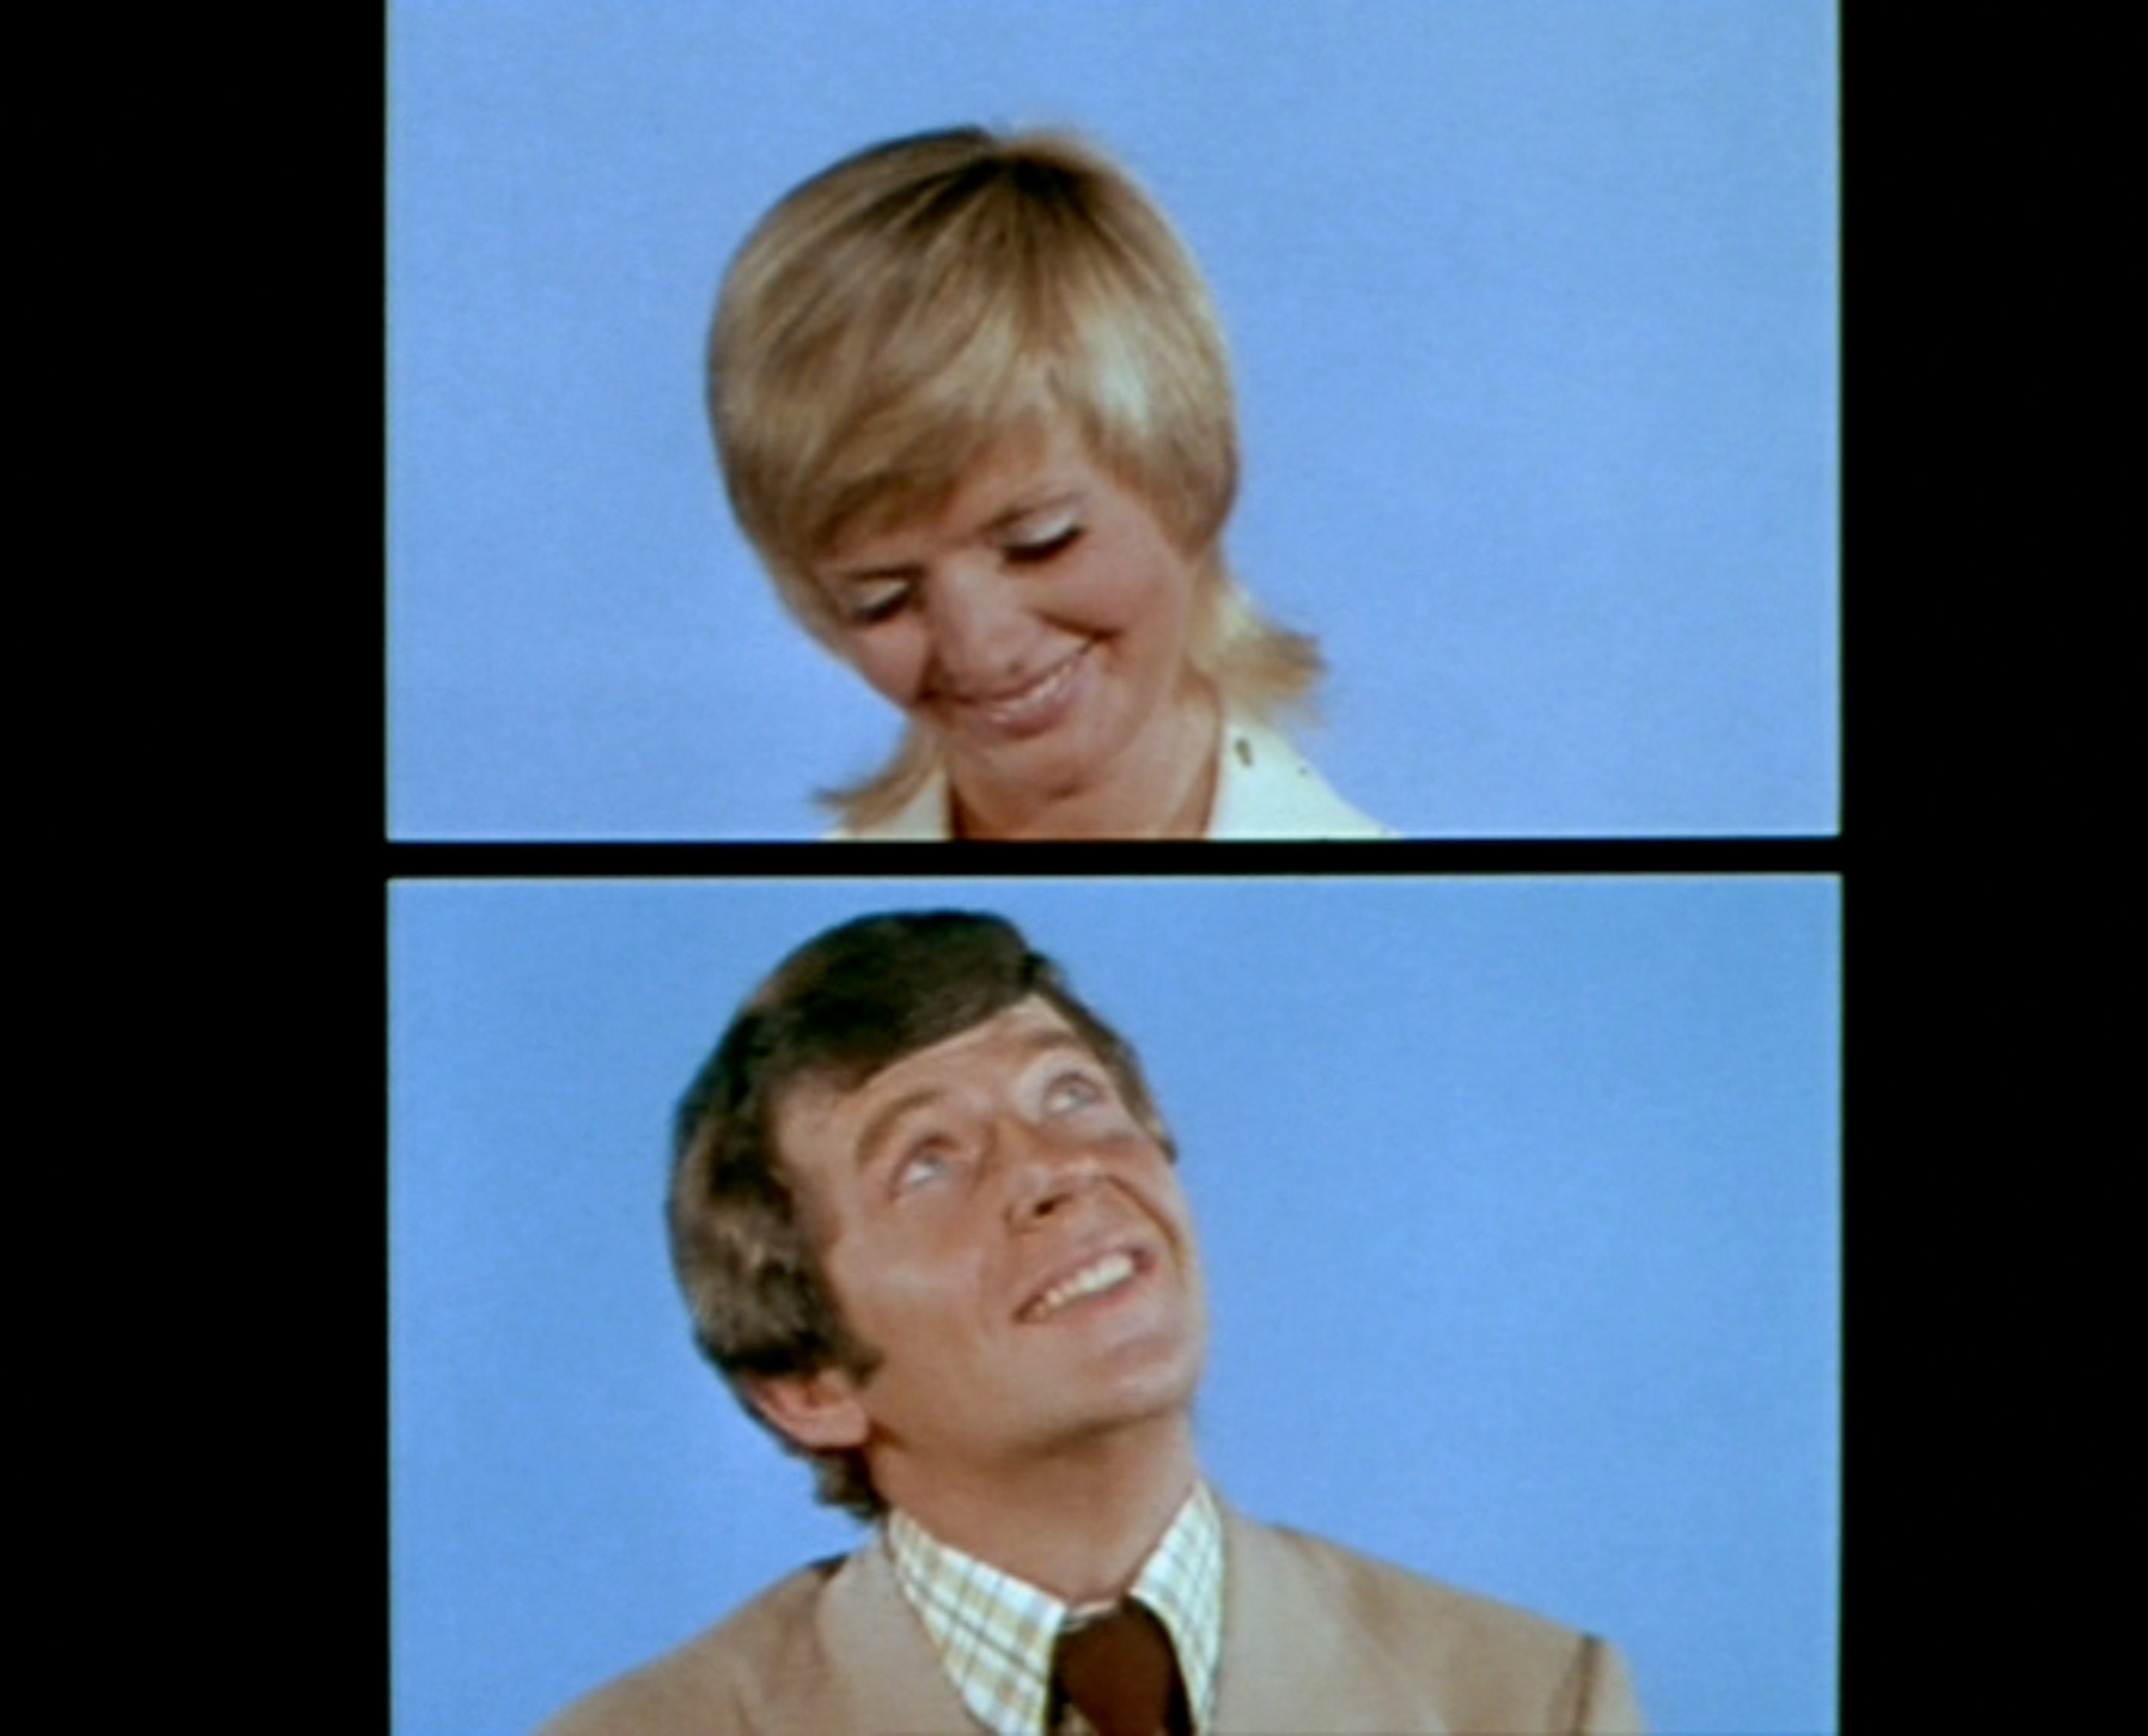 Florence Henderson and Robert Reed as Carol and Mike Brady in "The Subject Was Noses" episode of "The Brady Bunch" in 1973 | Source: Getty Images